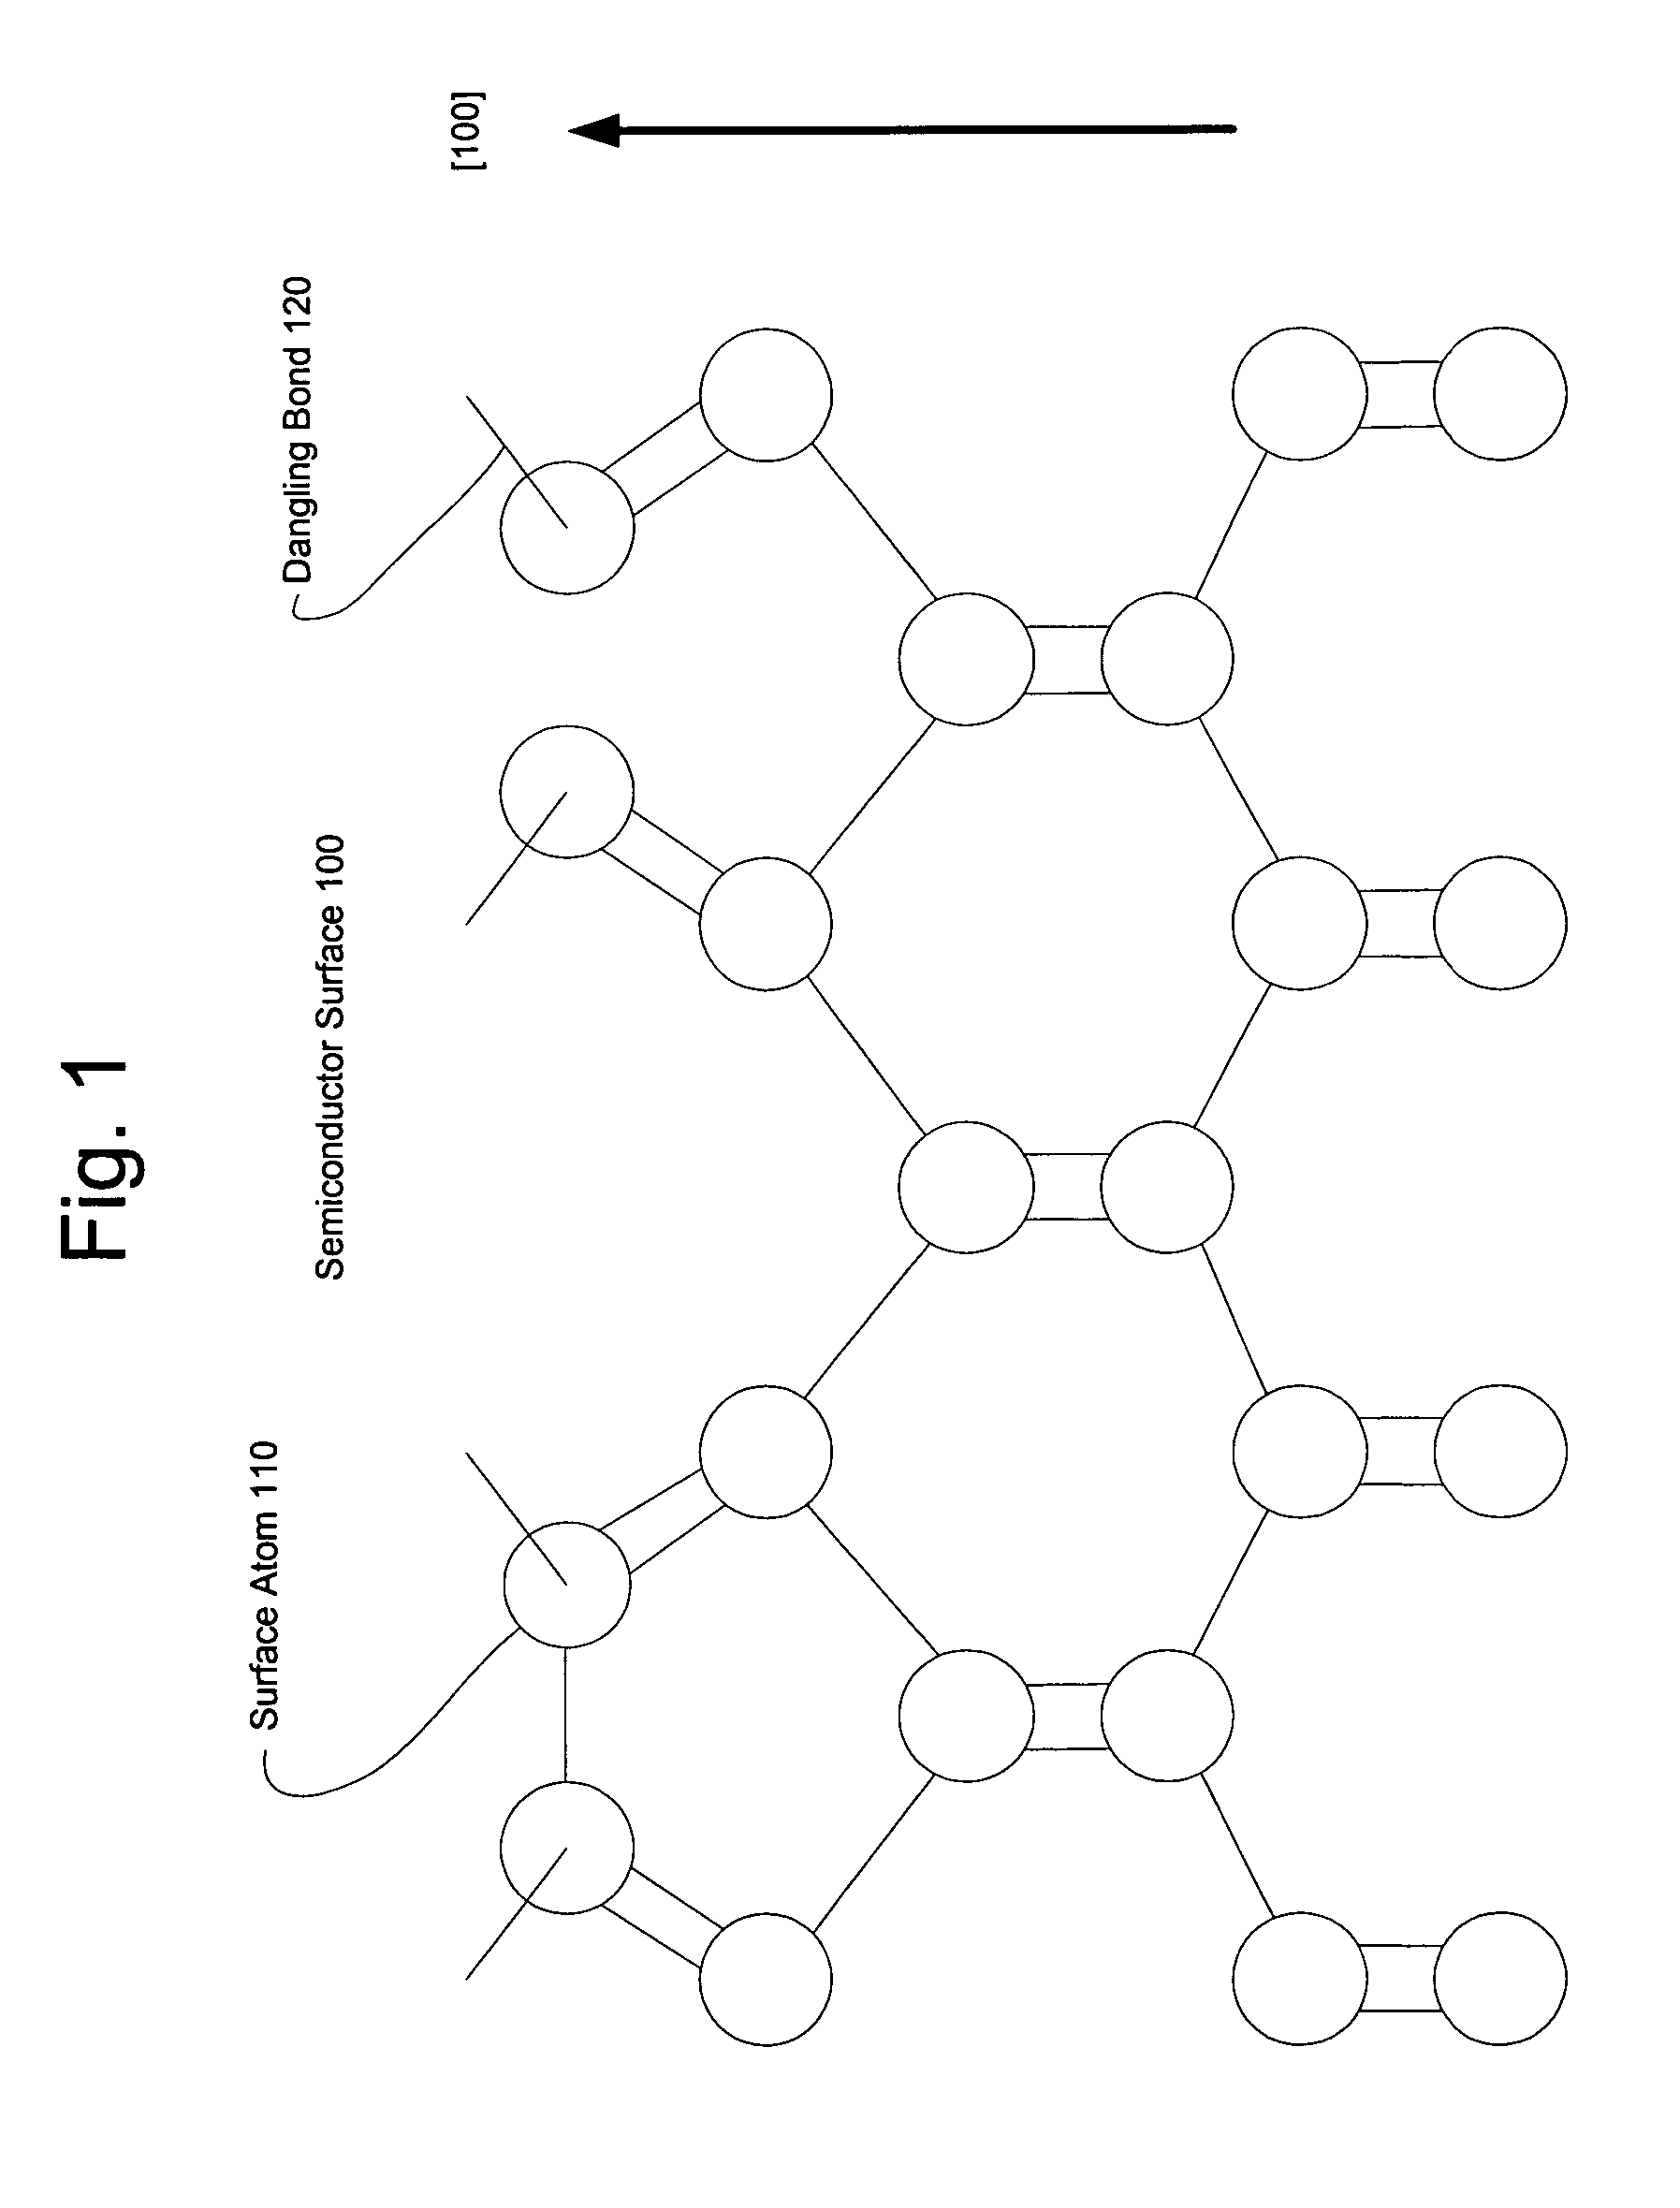 Method for depinning the Fermi level of a semiconductor at an electrical junction and devices incorporating such junctions